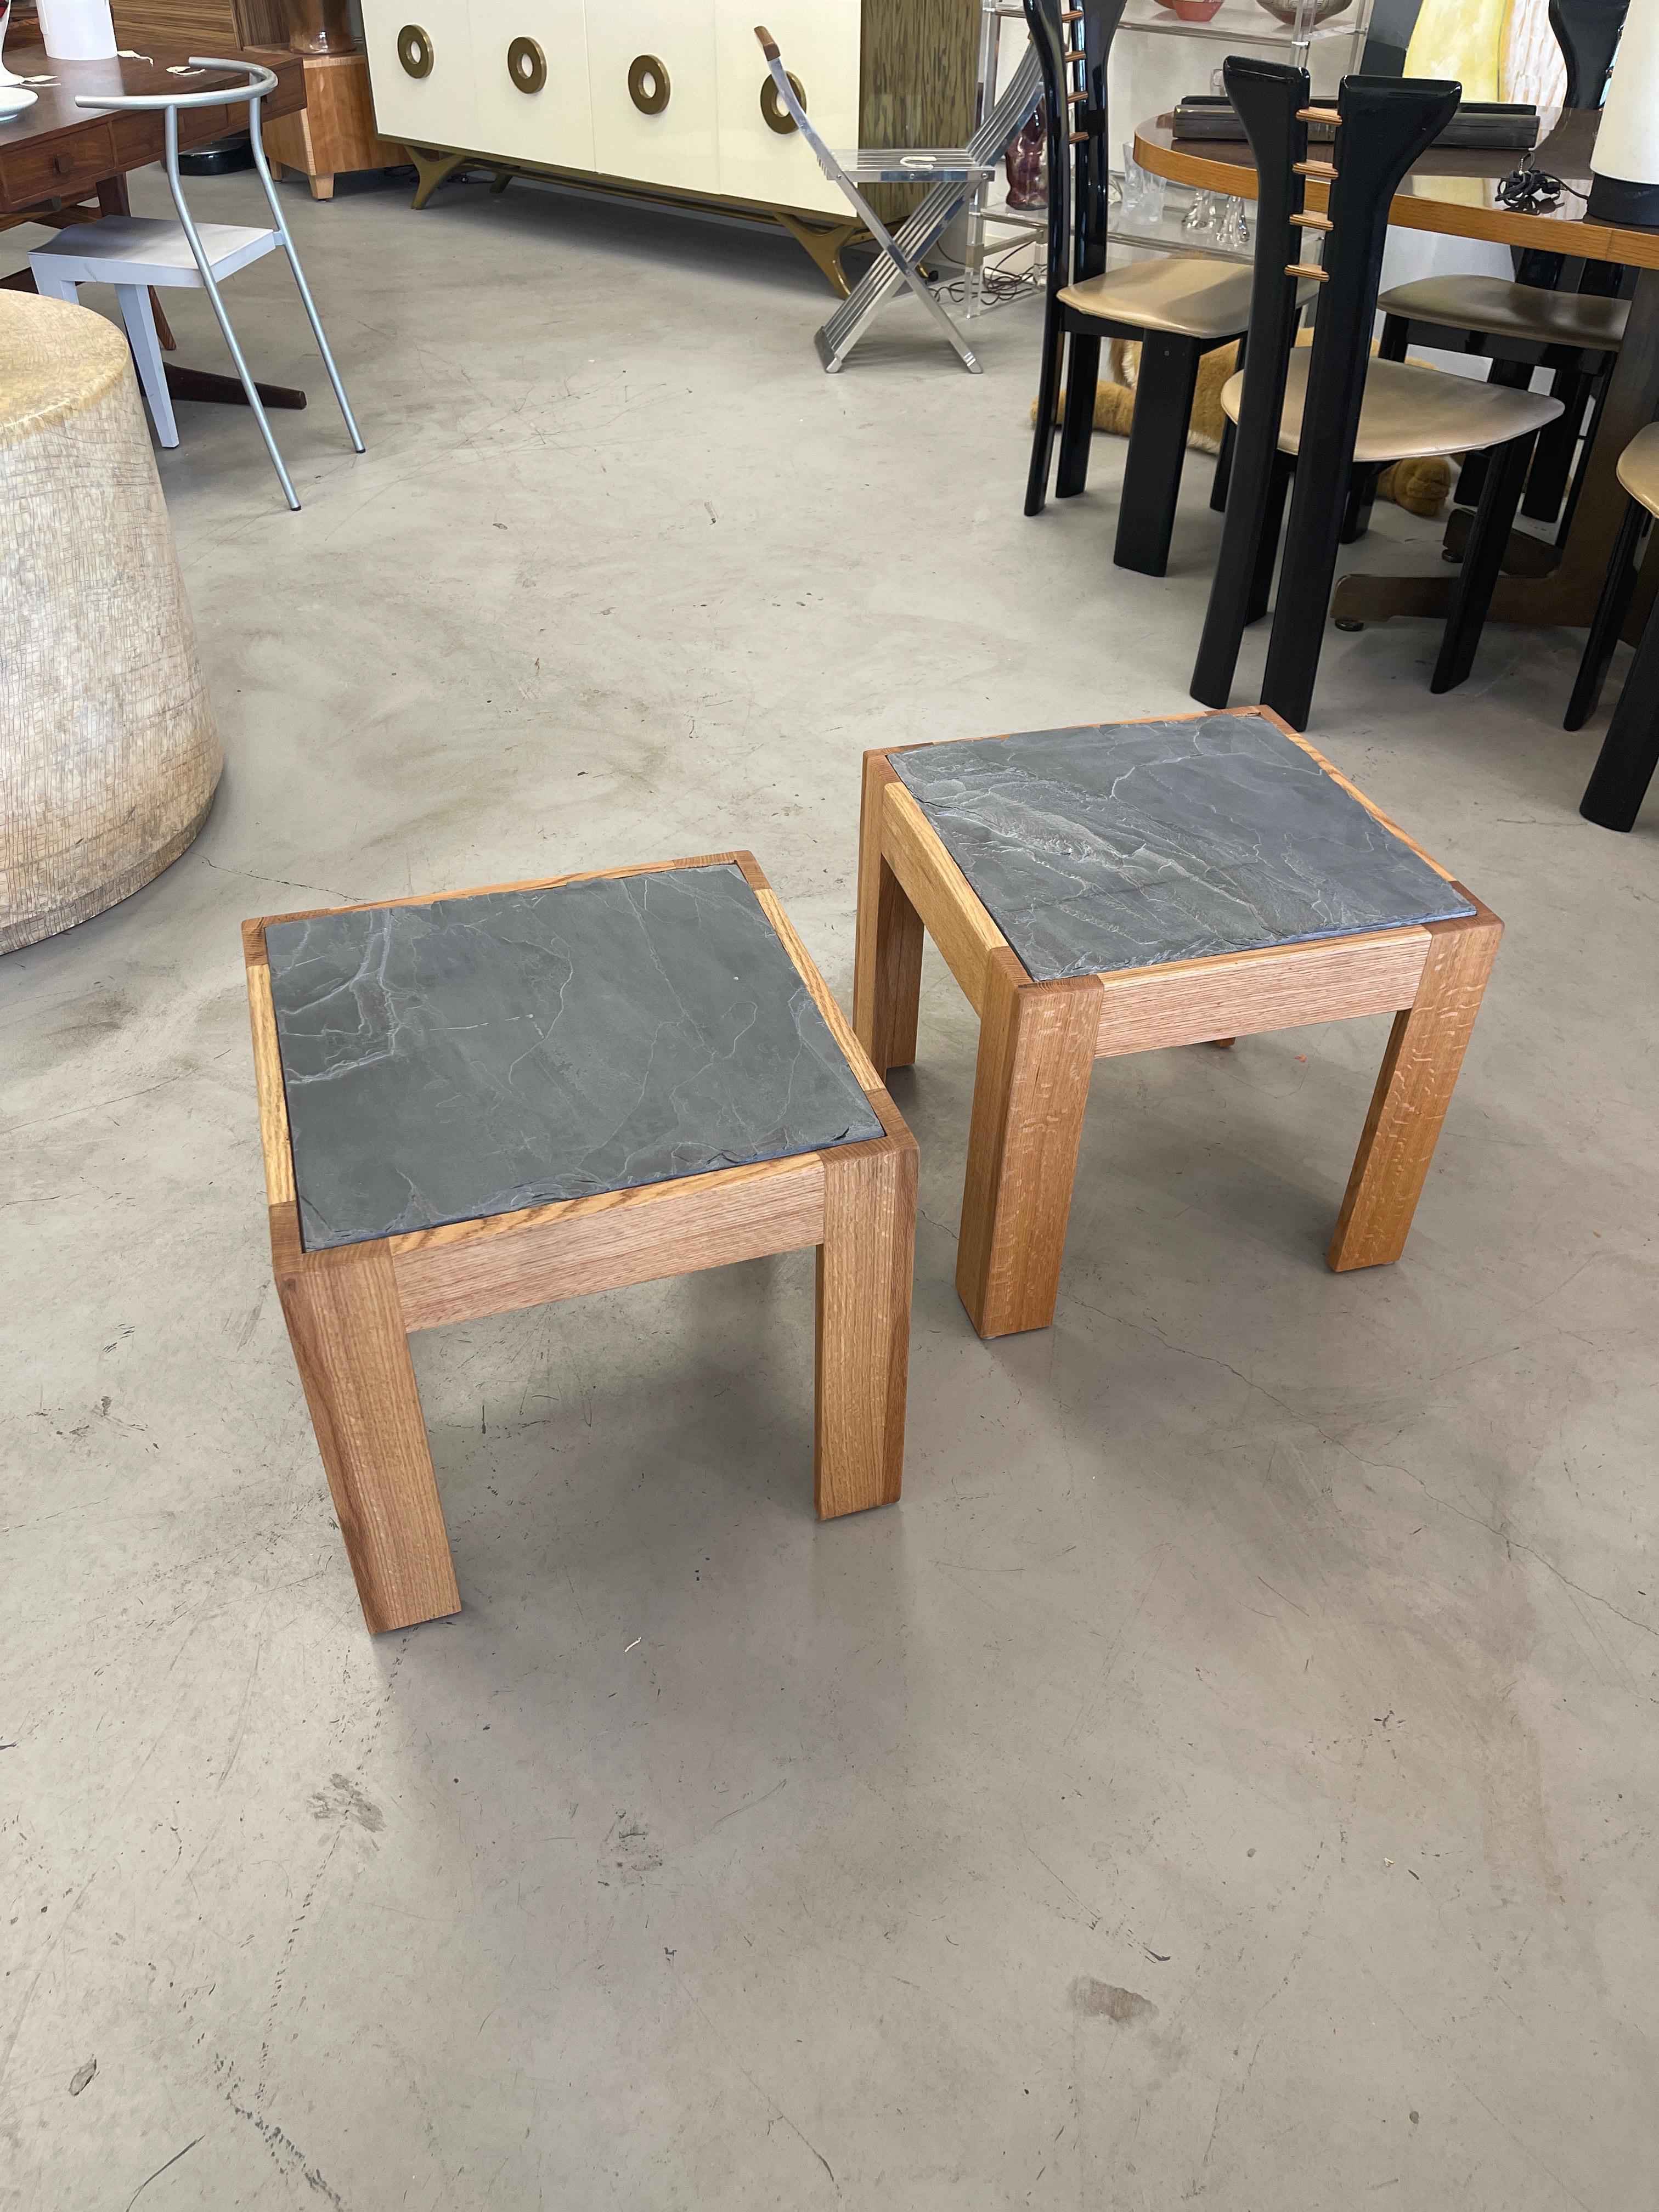 A pair of solid oak tables with slate inset tops. Beautiful graining to the oak sides. These are custom pieces newly made and ready to ship. The slate pieces have natural flaws, and imperfections, please see the detailed photos.